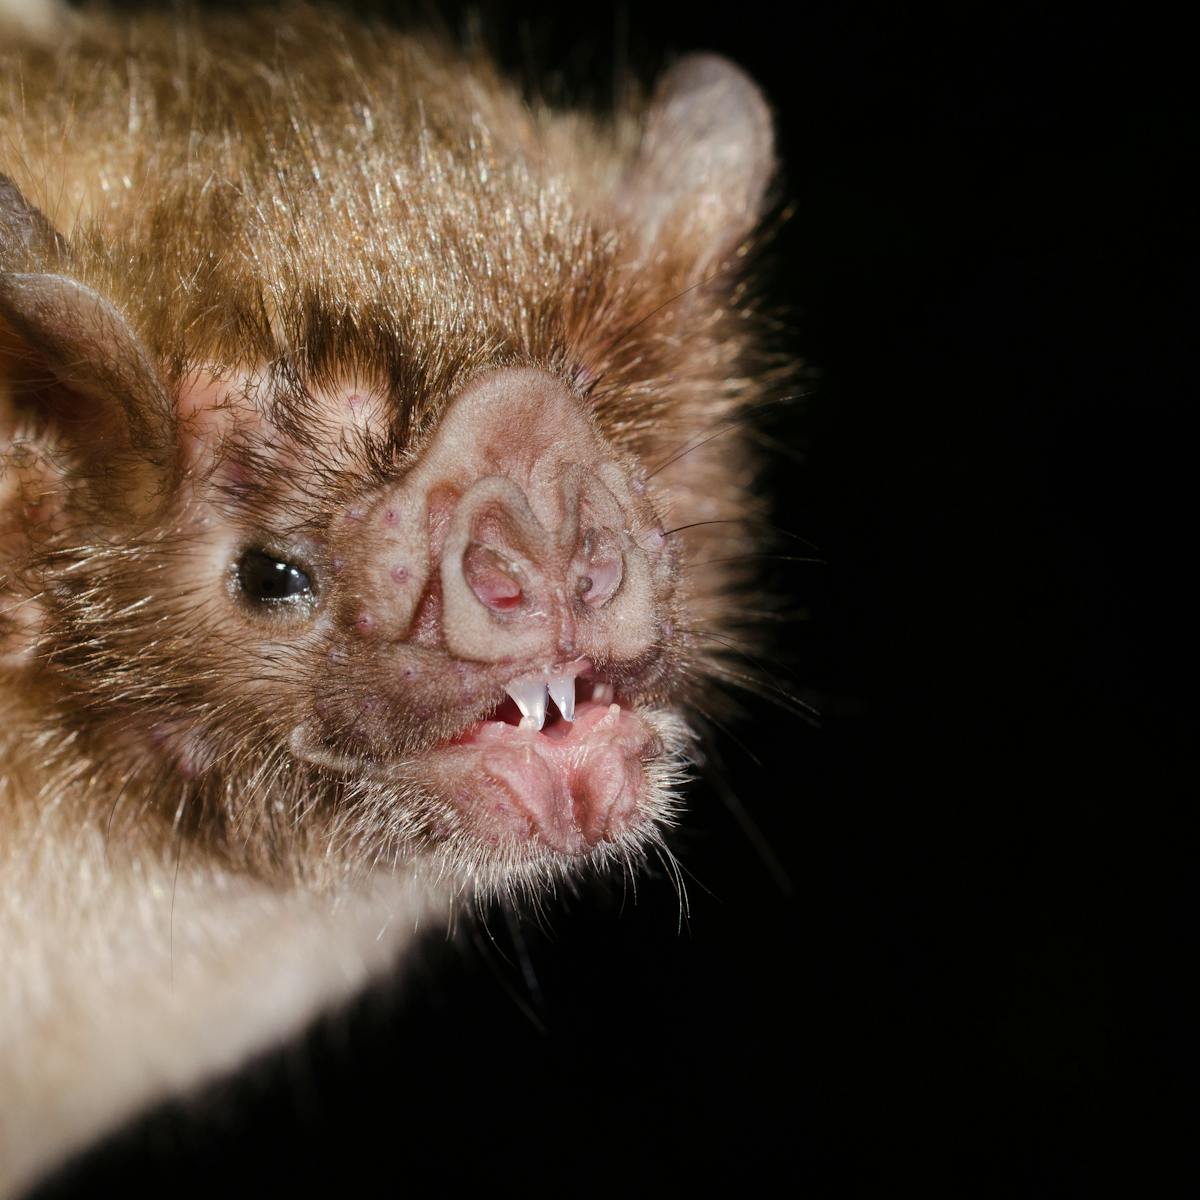 Vampire bats aren't the monsters we thought they were